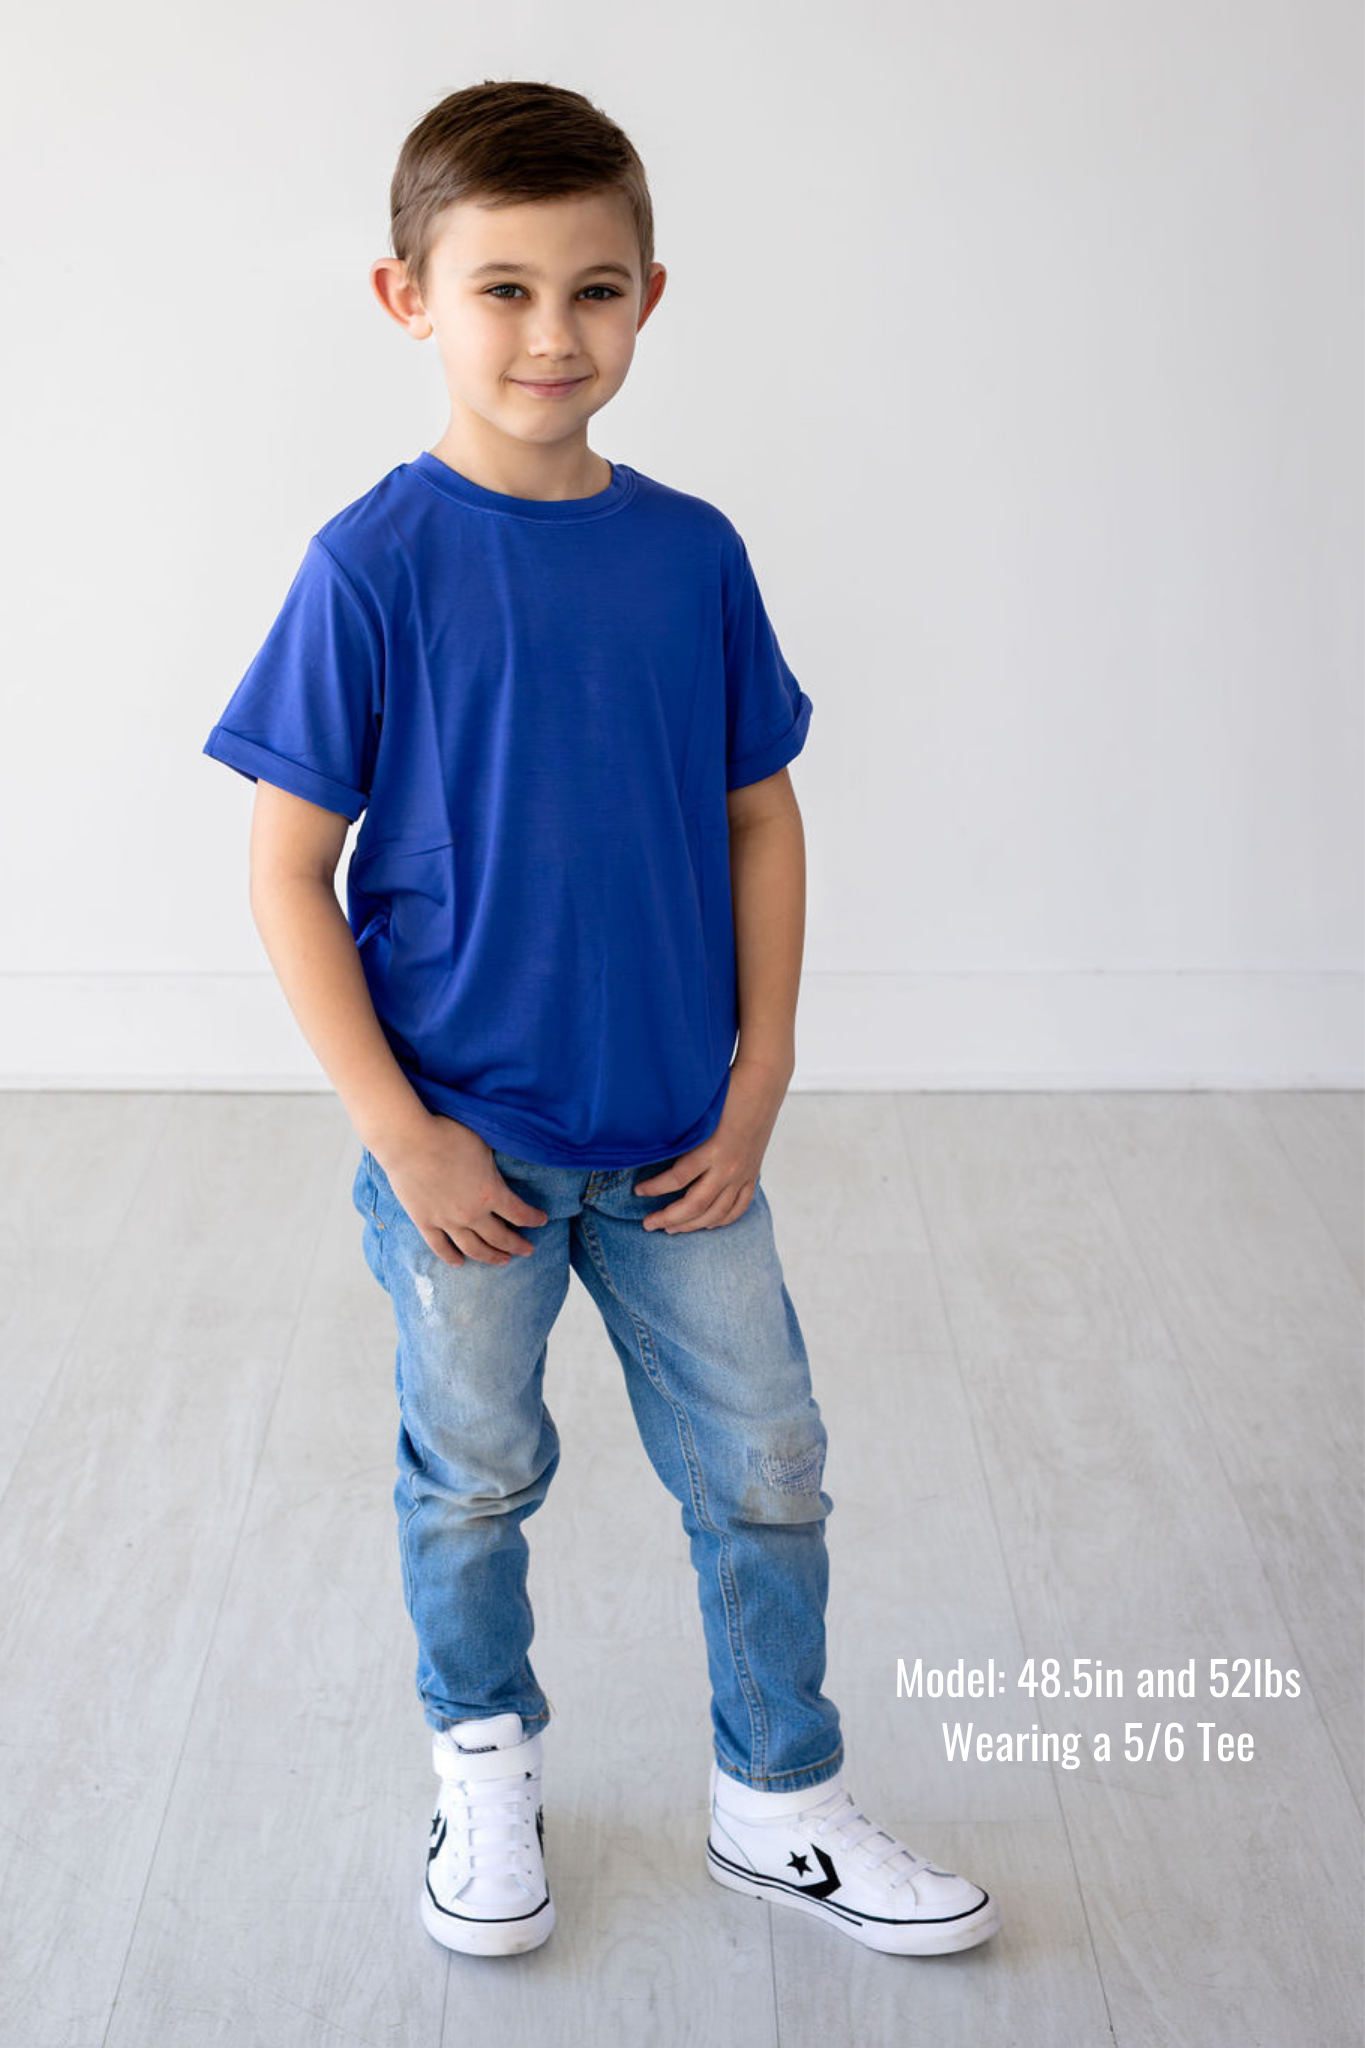 Bamboo Tee - Marlin-Ships from Eclipse Kids - Stella Lane Boutique